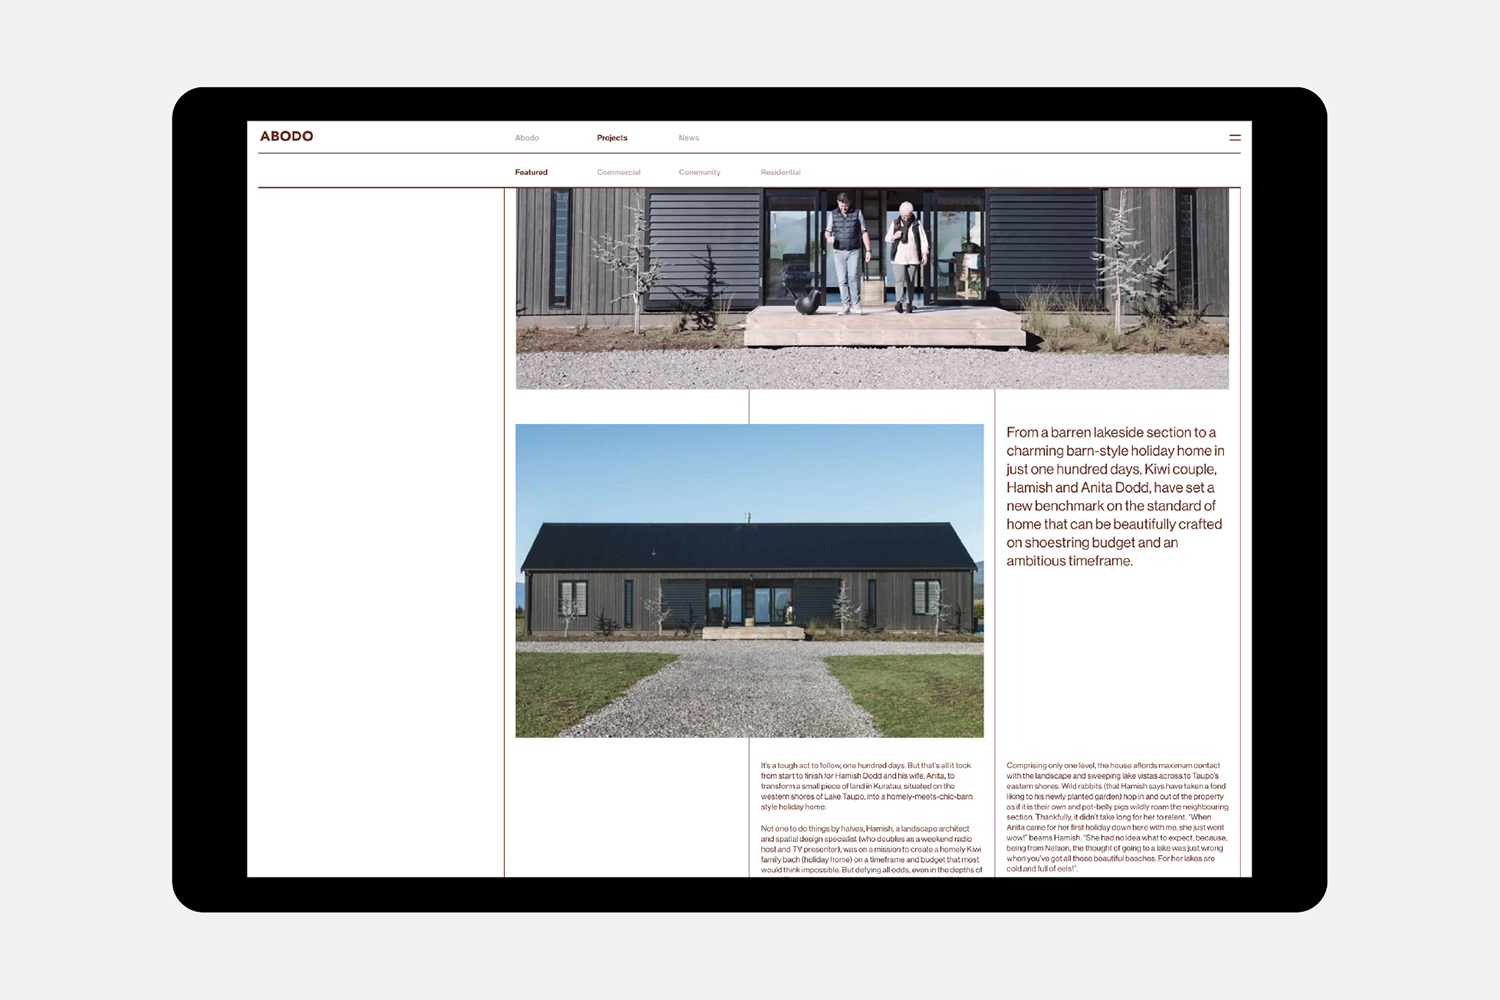 Website design by Richards Partners for NZ timber specialists Abodo